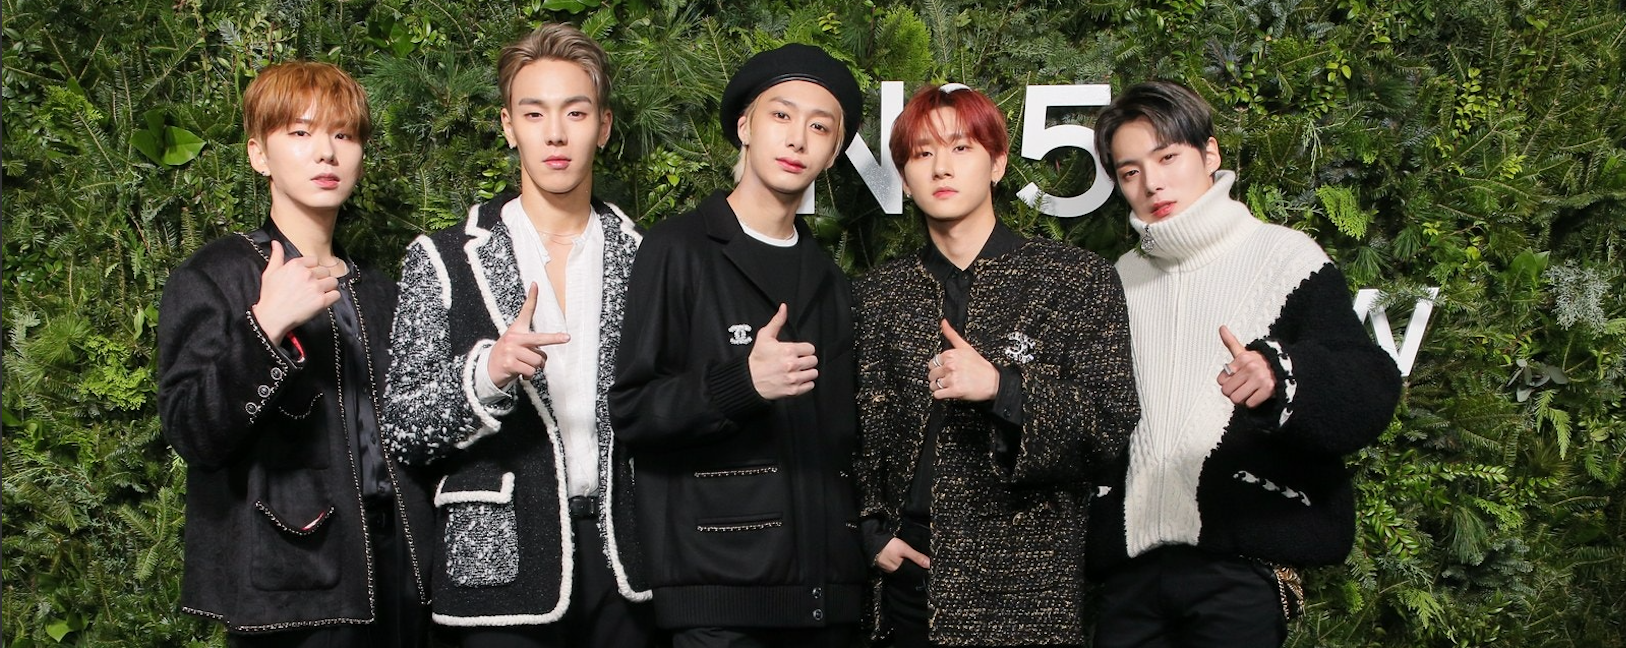 MONSTA X performed at the 'CHANEL No. 5 In The Snow' evening in New York - Kpopshop